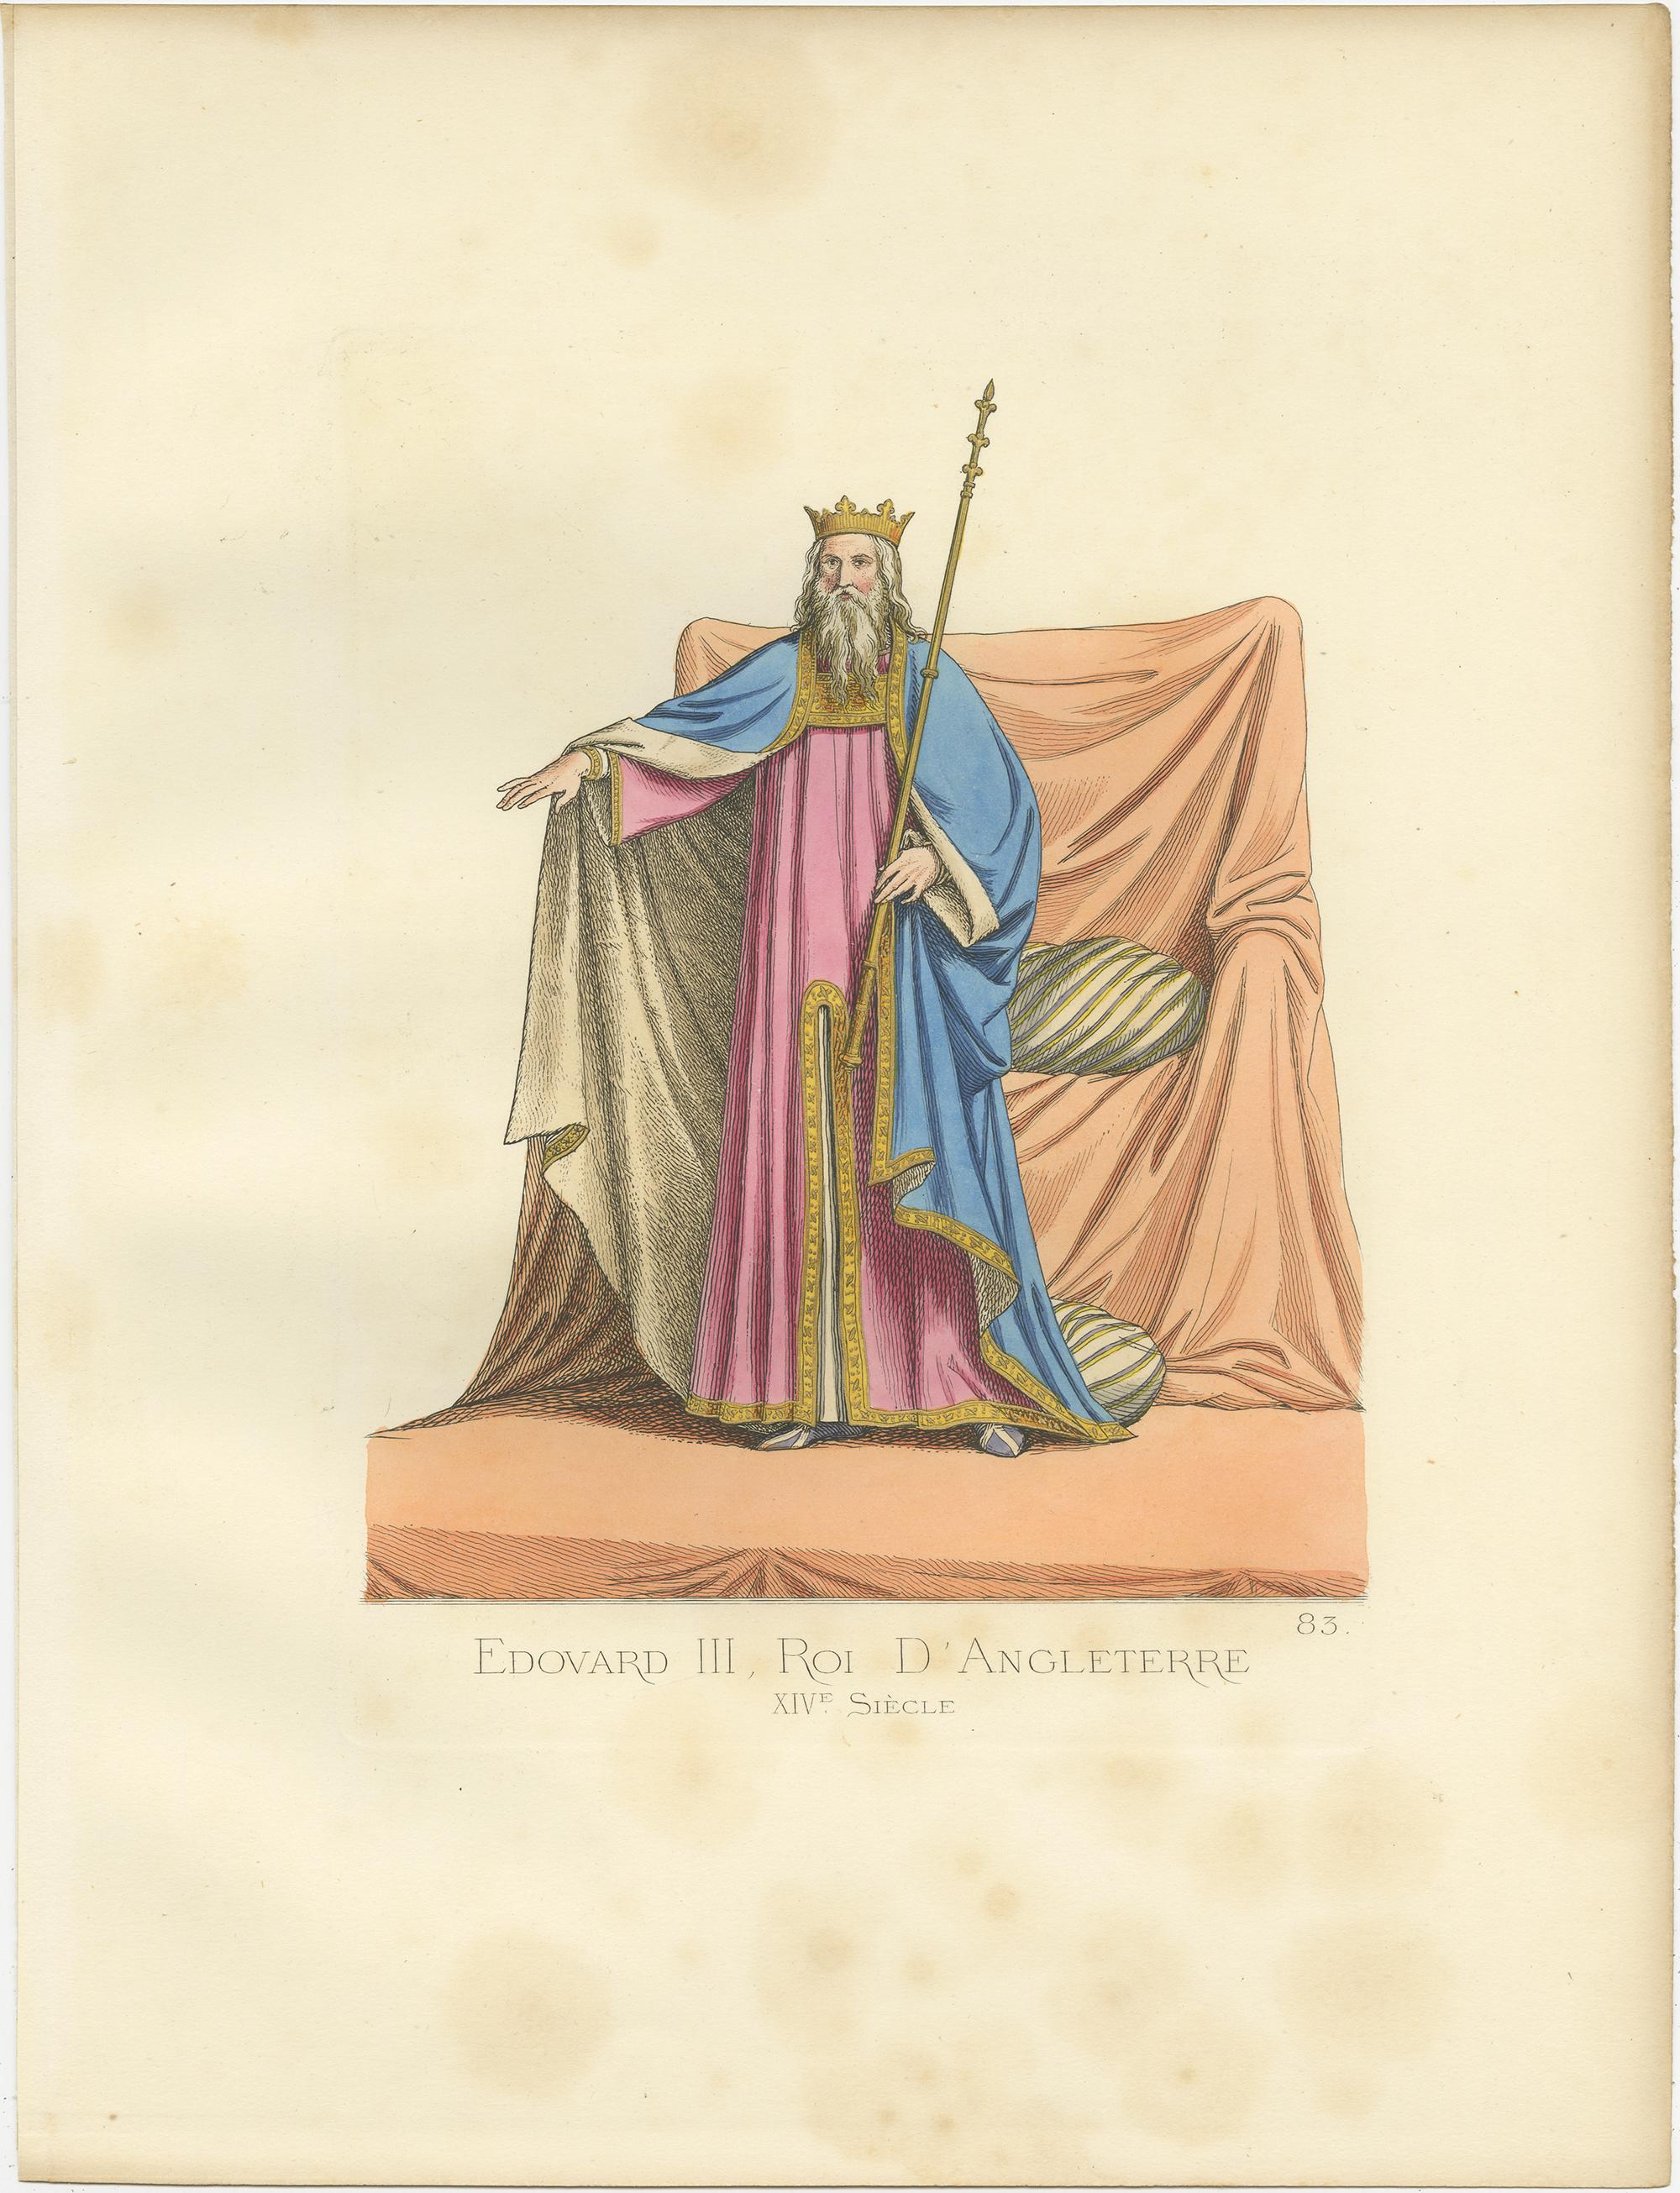 Antique print titled ‘Edouard III, Roi D’Angleterre, XIVe Siecle.’ Original antique print of Edward III, King of England, 14th century. This print originates from 'Costumes historiques de femmes du XIII, XIV et XV siècle' by C. Bonnard. Published